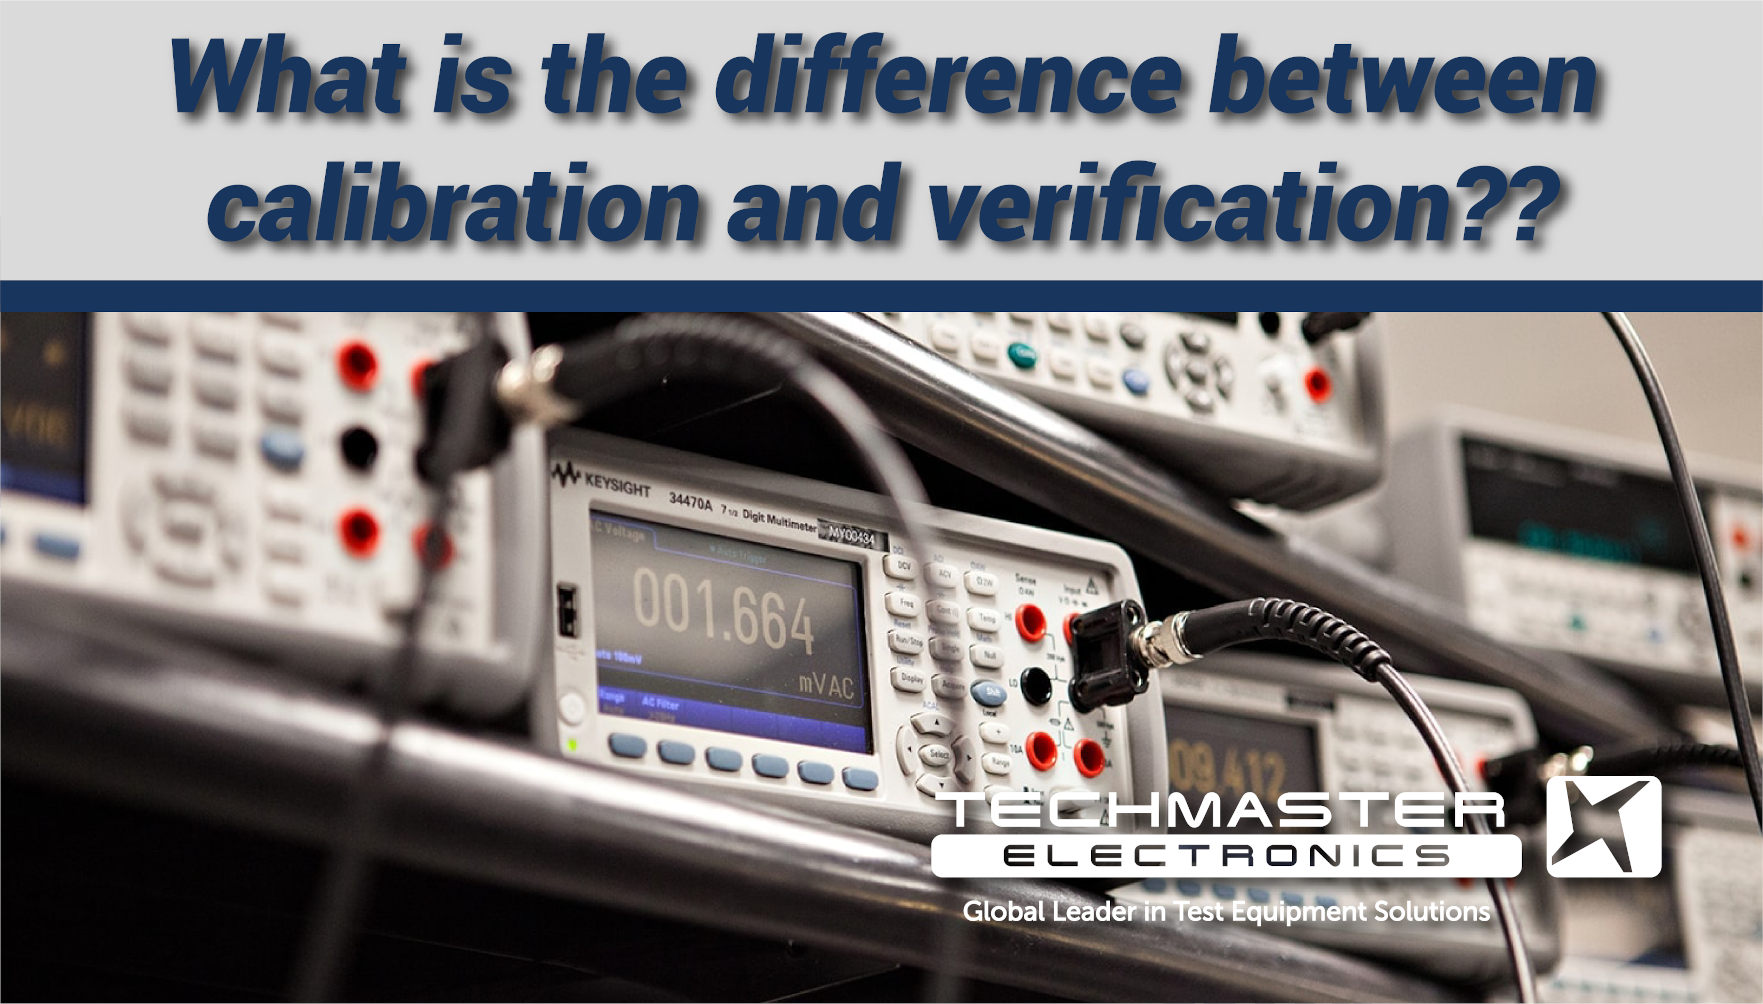 What is the difference between calibration and verification?